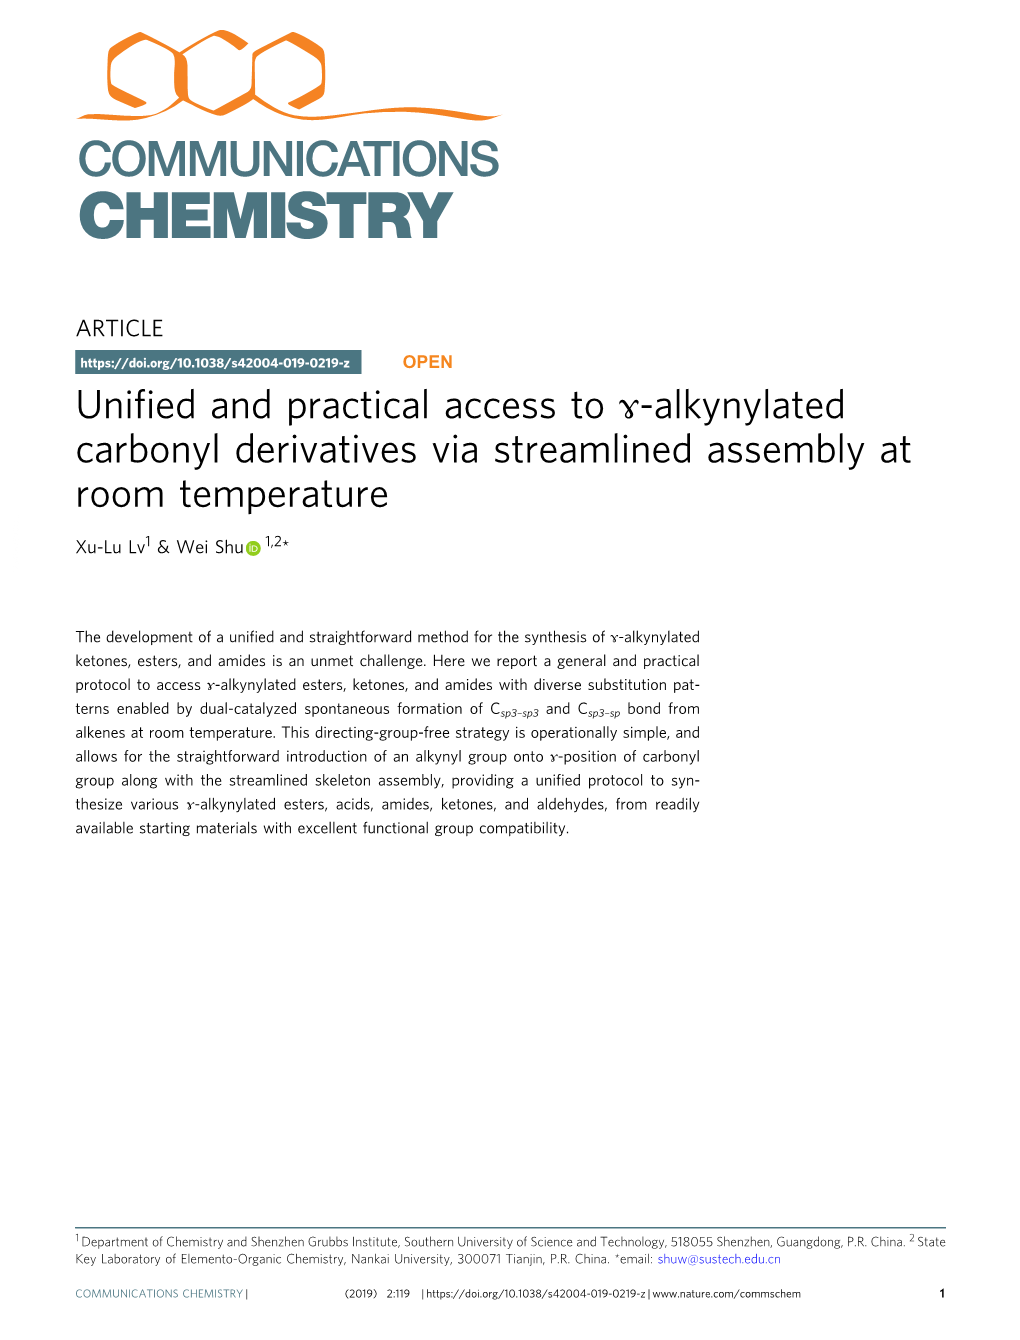 Unified and Practical Access to É¤-Alkynylated Carbonyl Derivatives Via Streamlined Assembly at Room Temperature